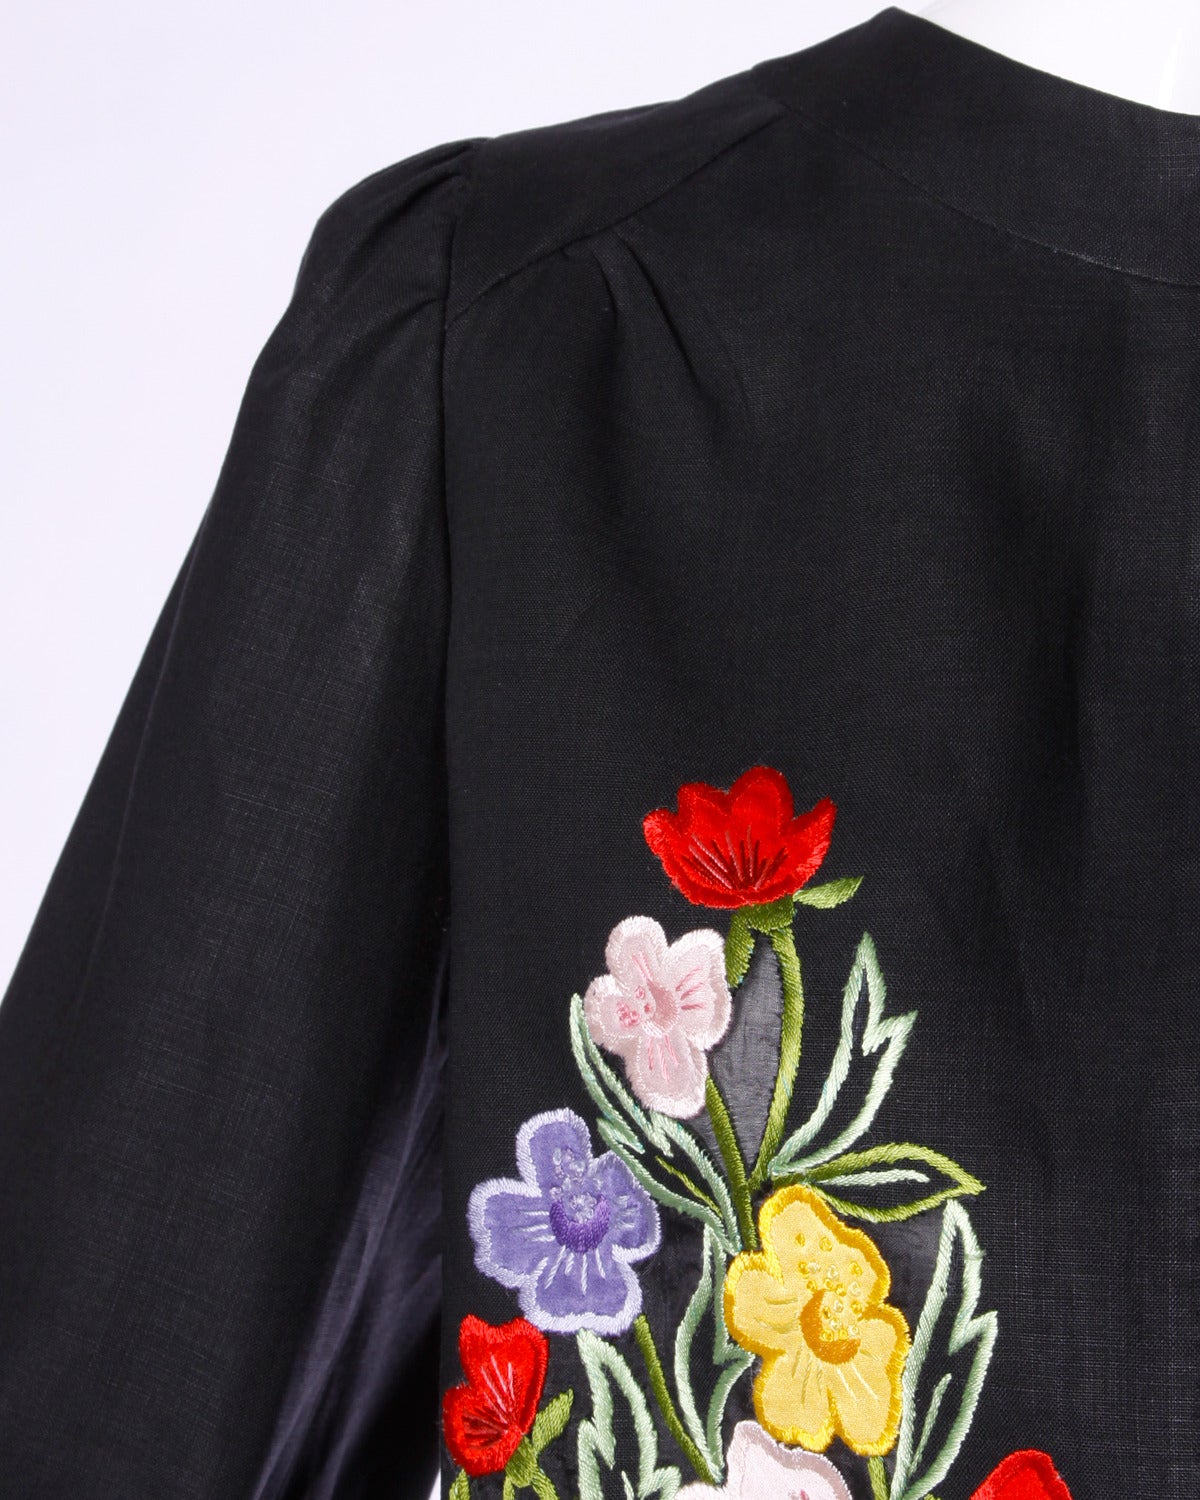 Gorgeous black linen jacket by Italian designer Tiziani with a zip up front and colorful embroidered floral design on the front.

Details:

Unlined
Front Zip and Hook Closure
Estimated Size: Small
Color: Multicolored/ Black
Fabric: